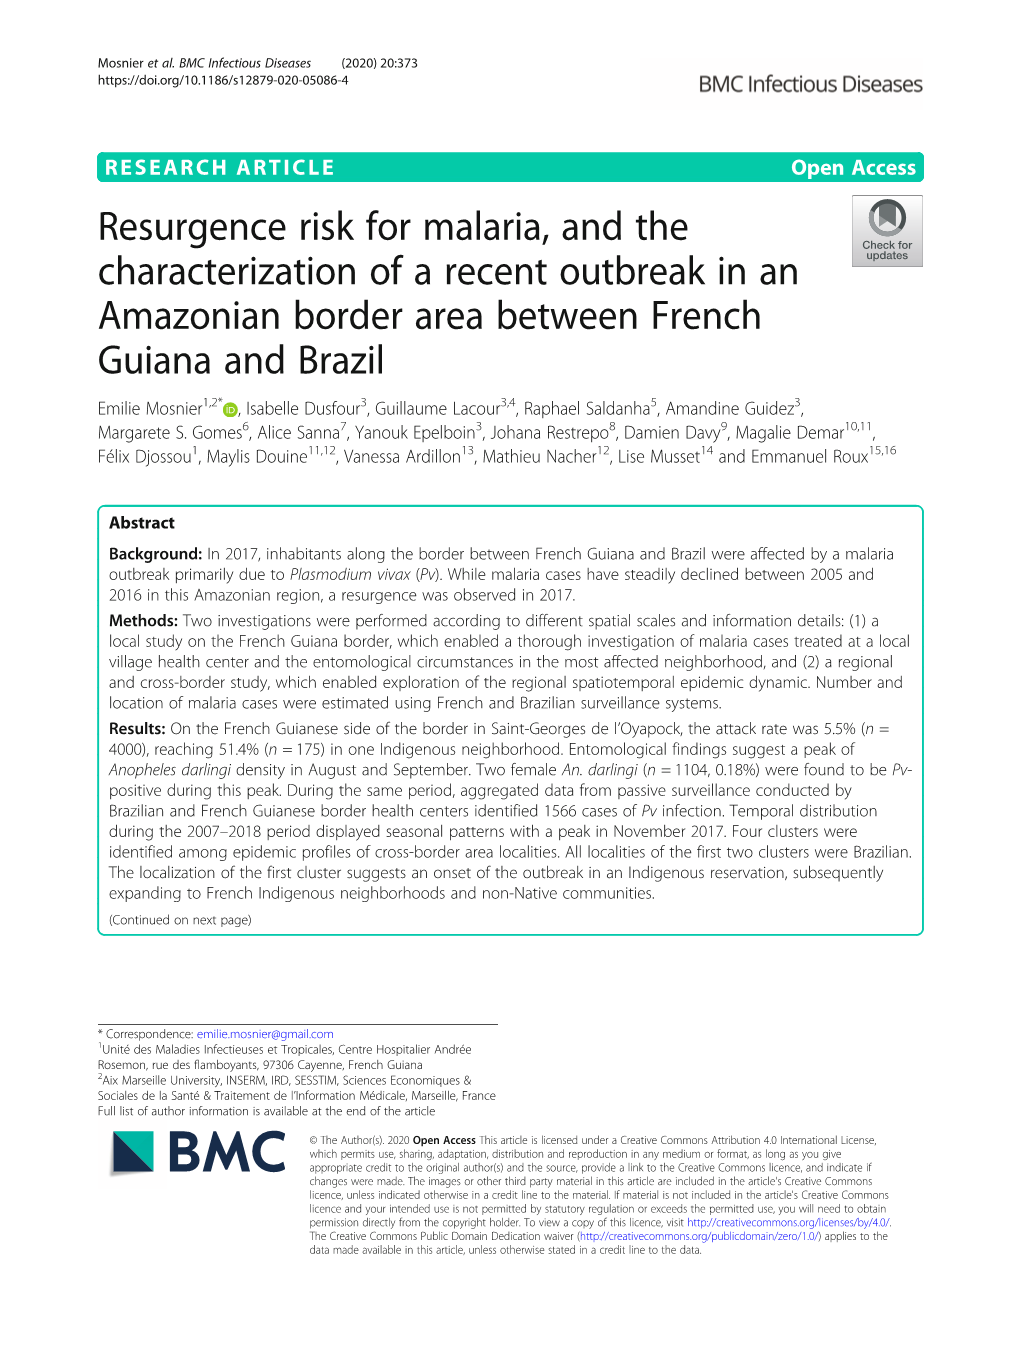 Resurgence Risk for Malaria, and the Characterization of a Recent Outbreak in an Amazonian Border Area Between French Guiana